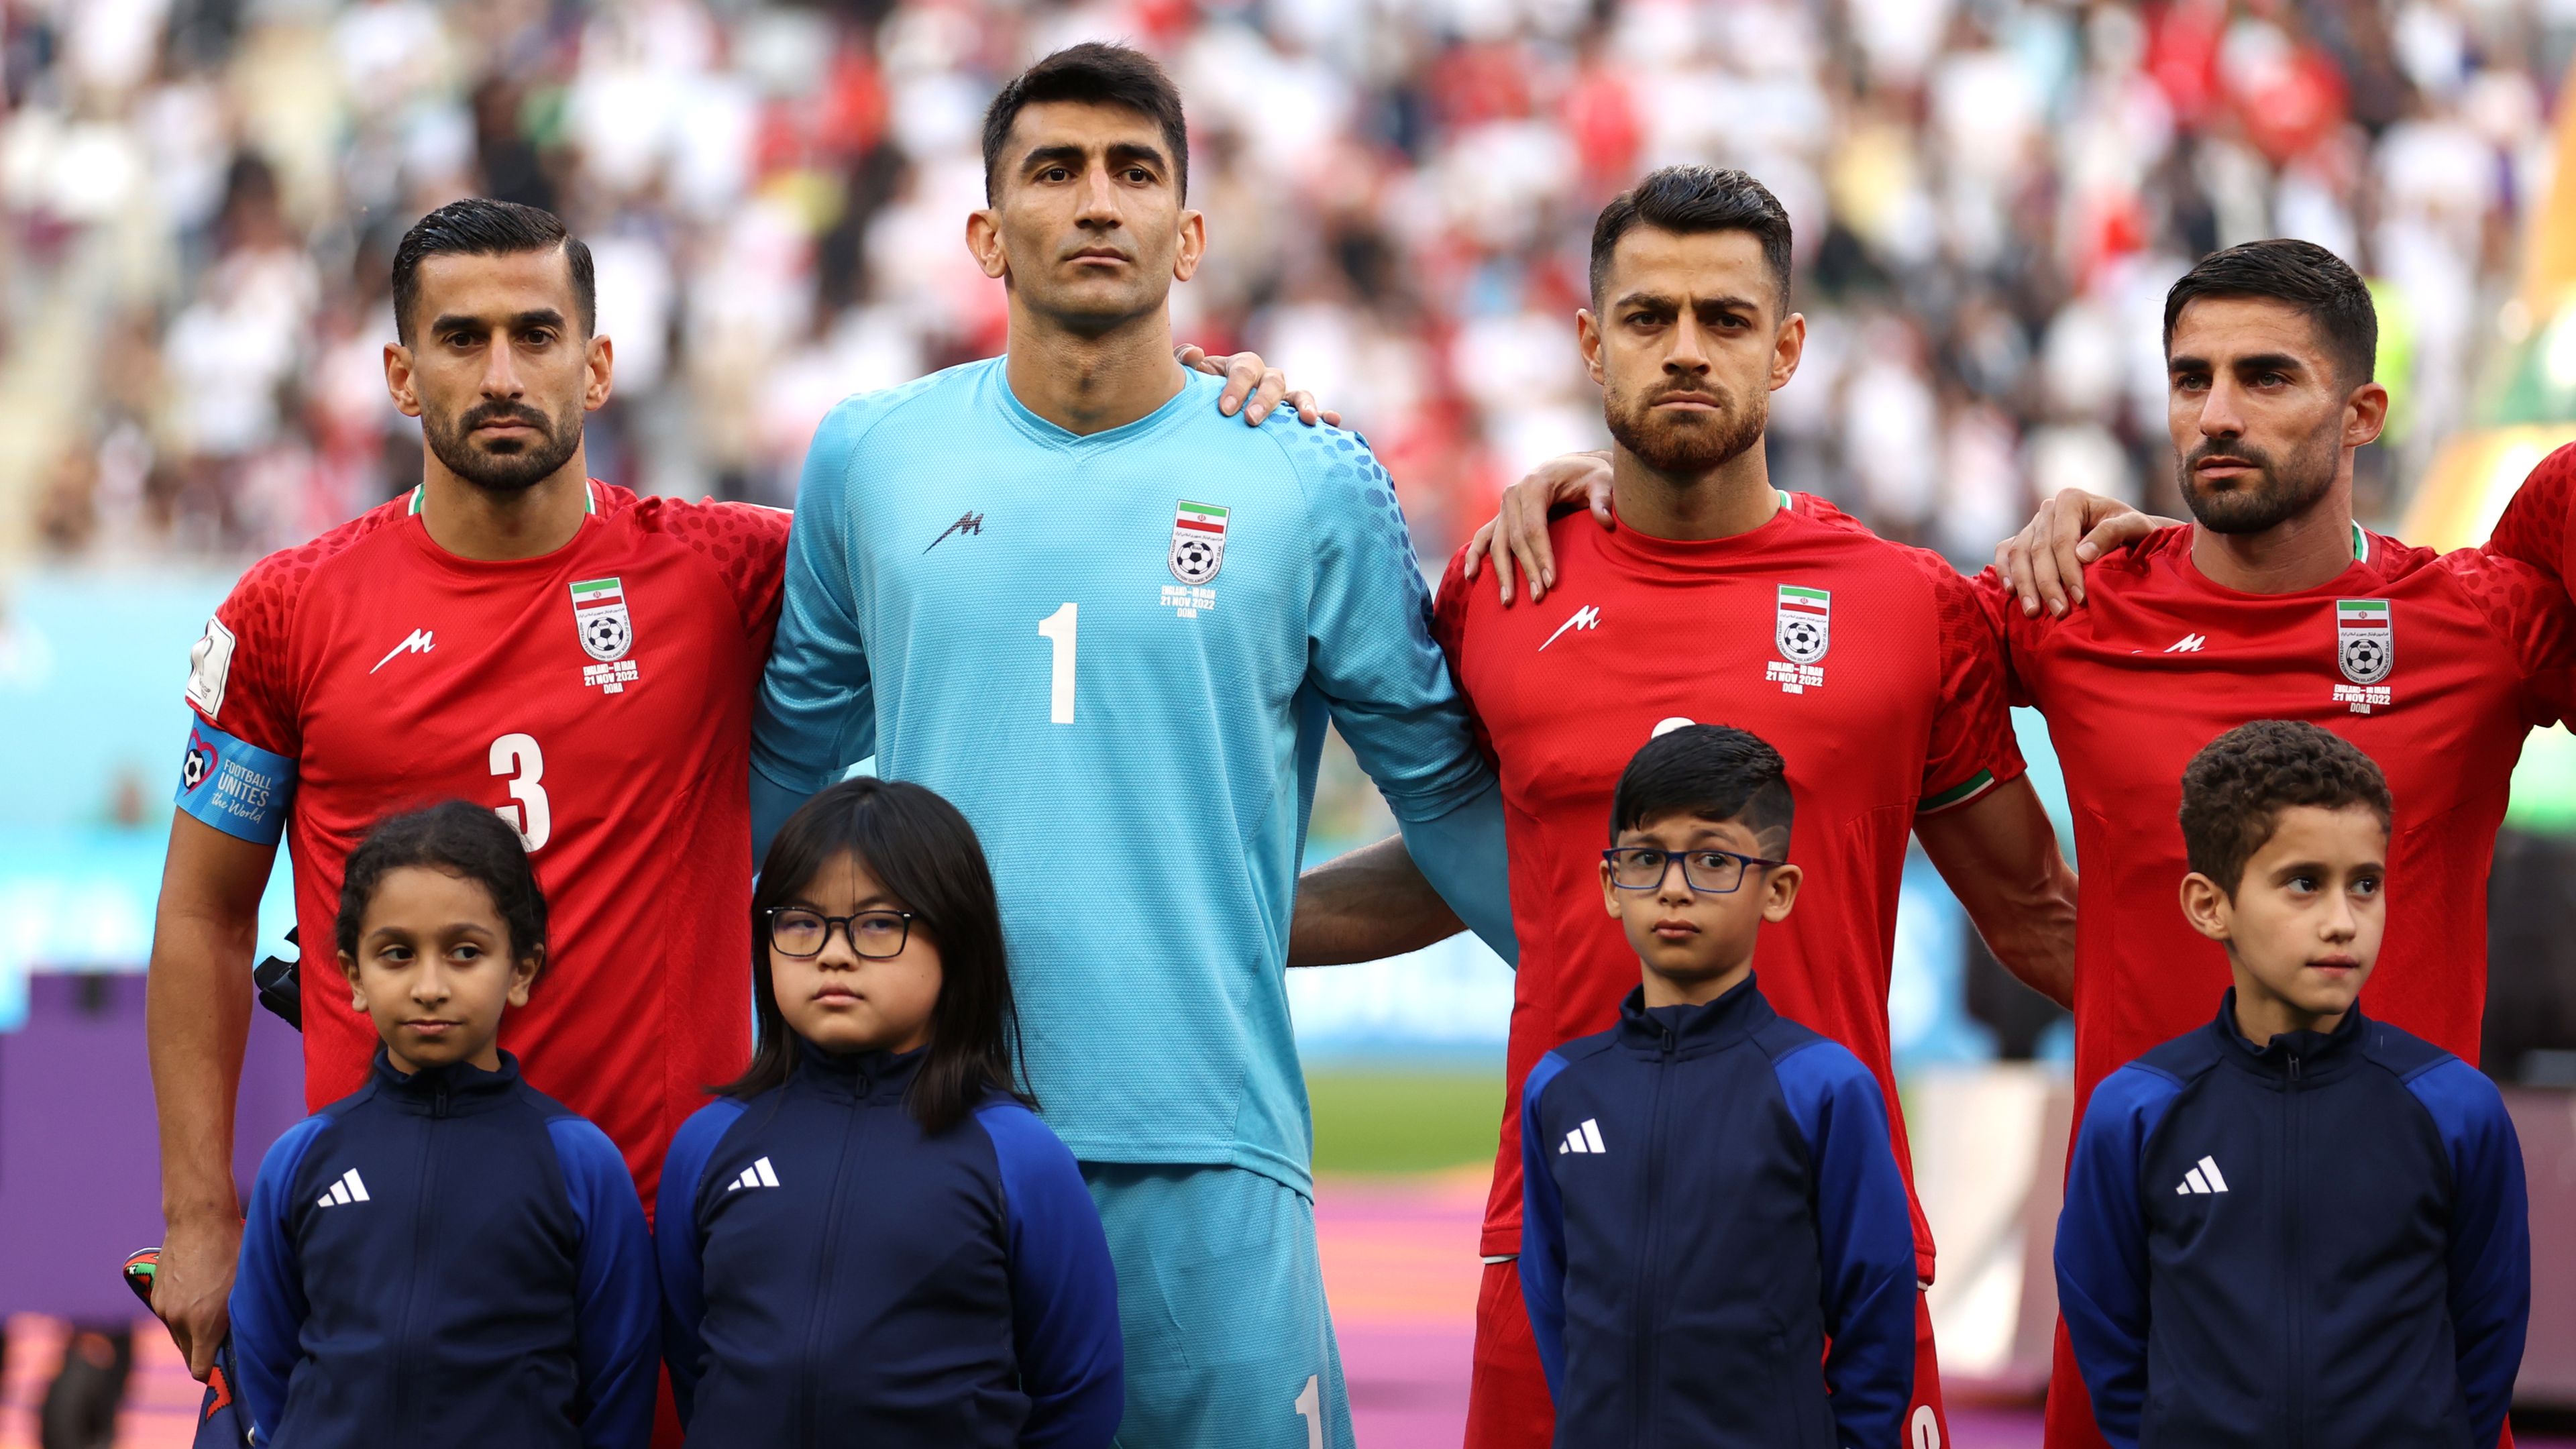 Iran players' powerful national anthem protest leaves female fan in tears